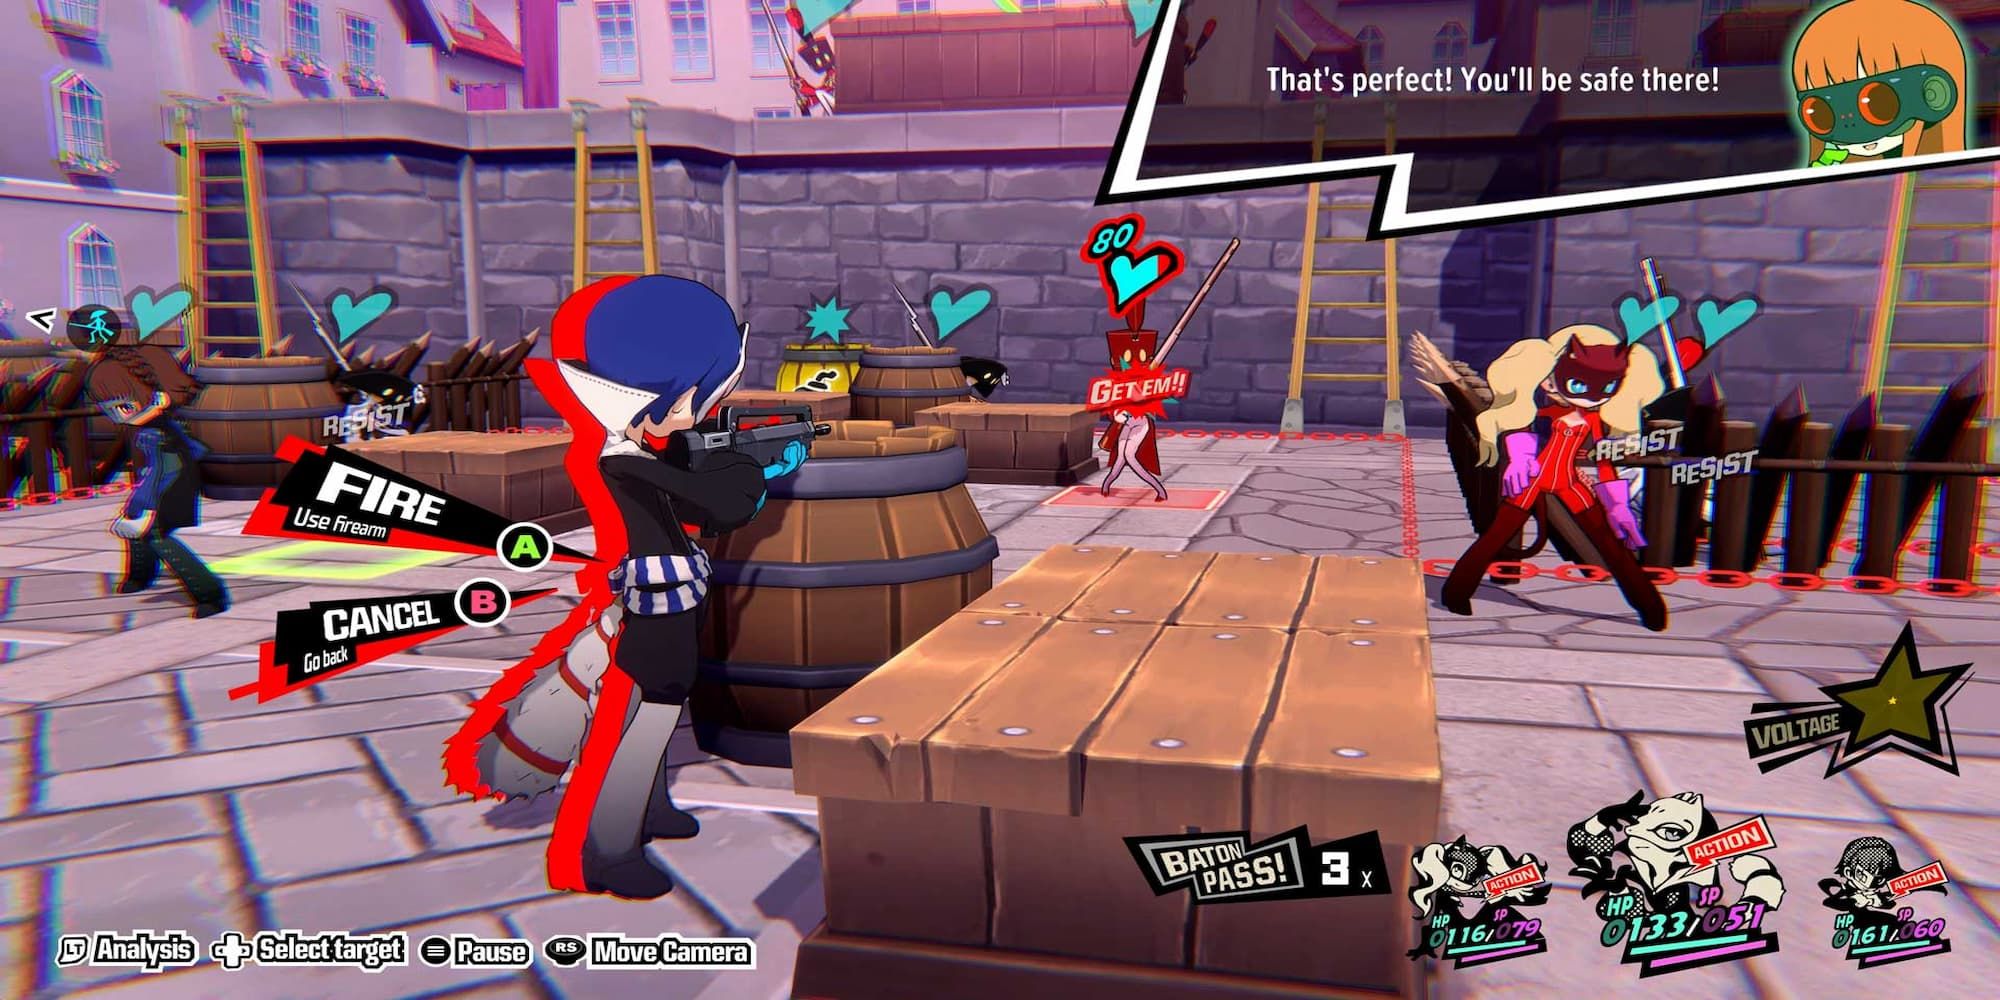 Yusuke Using Cover And Shooting An Enemy 